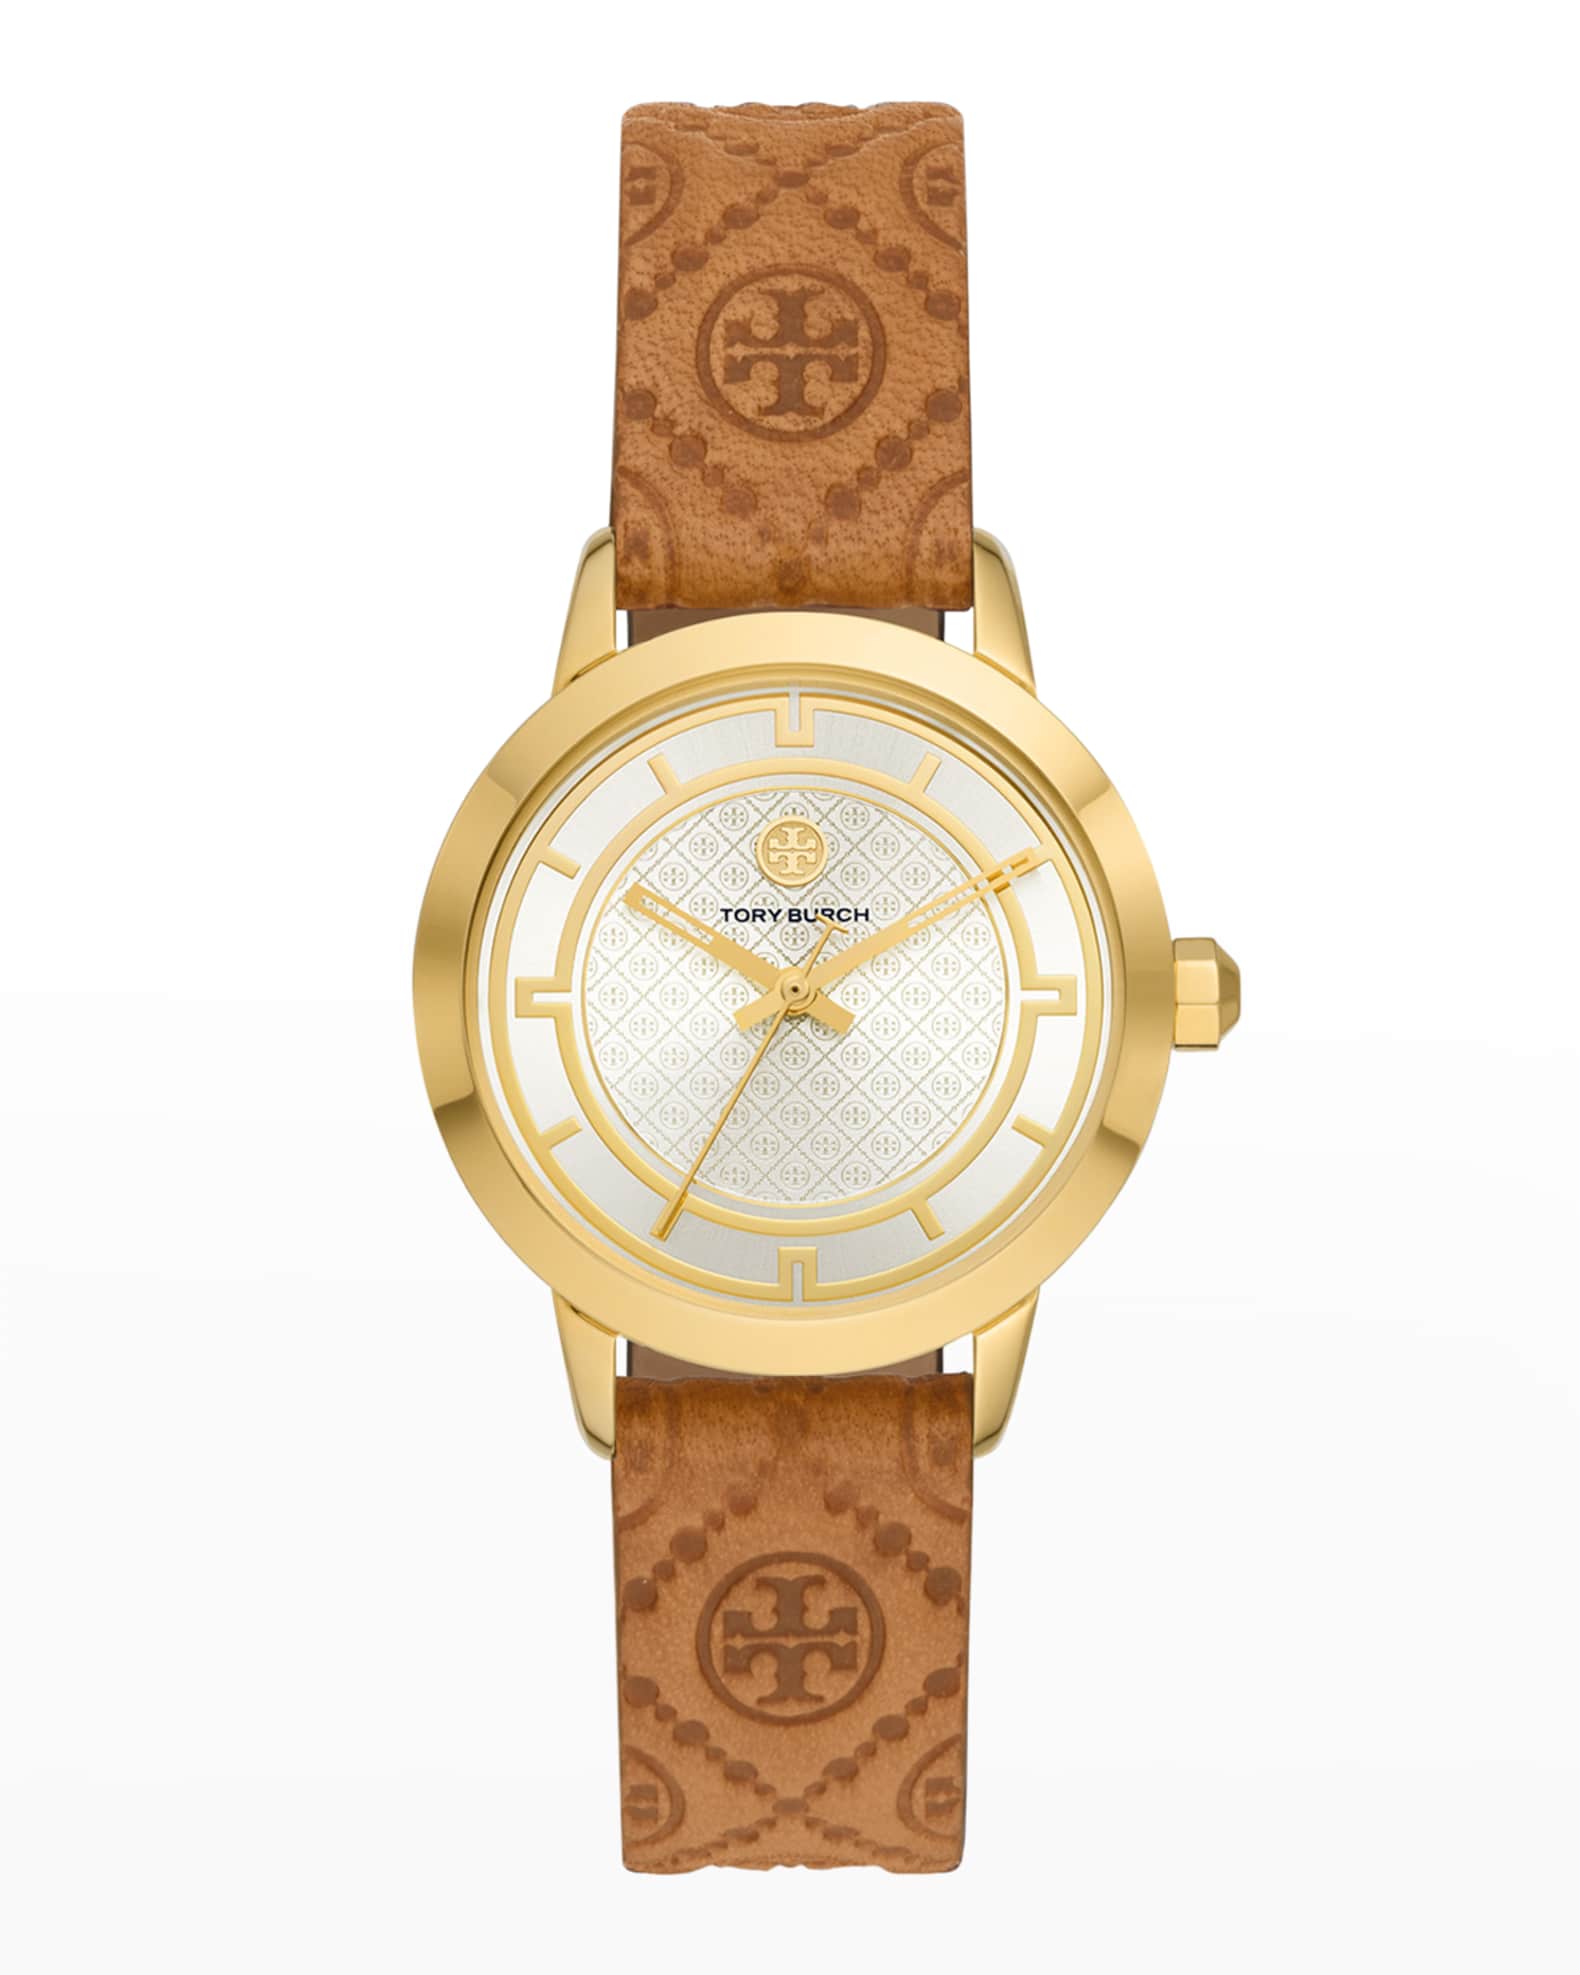 Tory Burch Women's The Robinson Watch, Ivory/Silver/Gold, One Size :  : Fashion